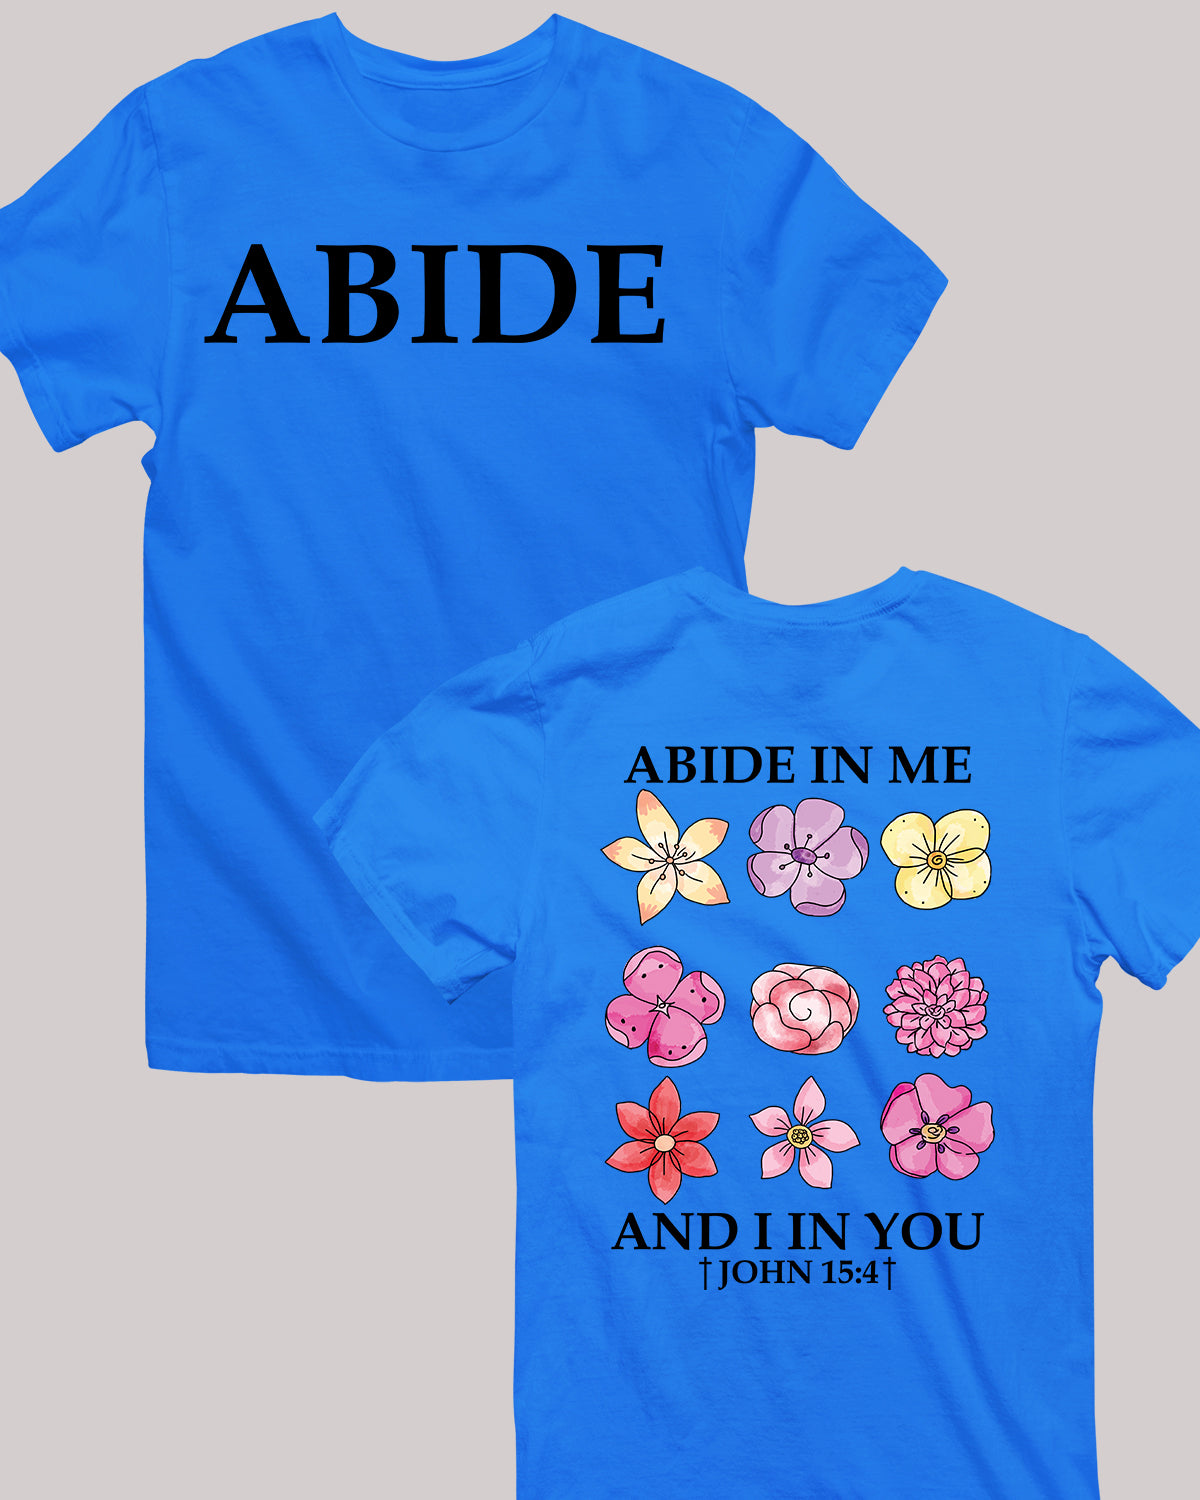 Abide in Me Faith Based Front and Back print Bible Verse Shirt